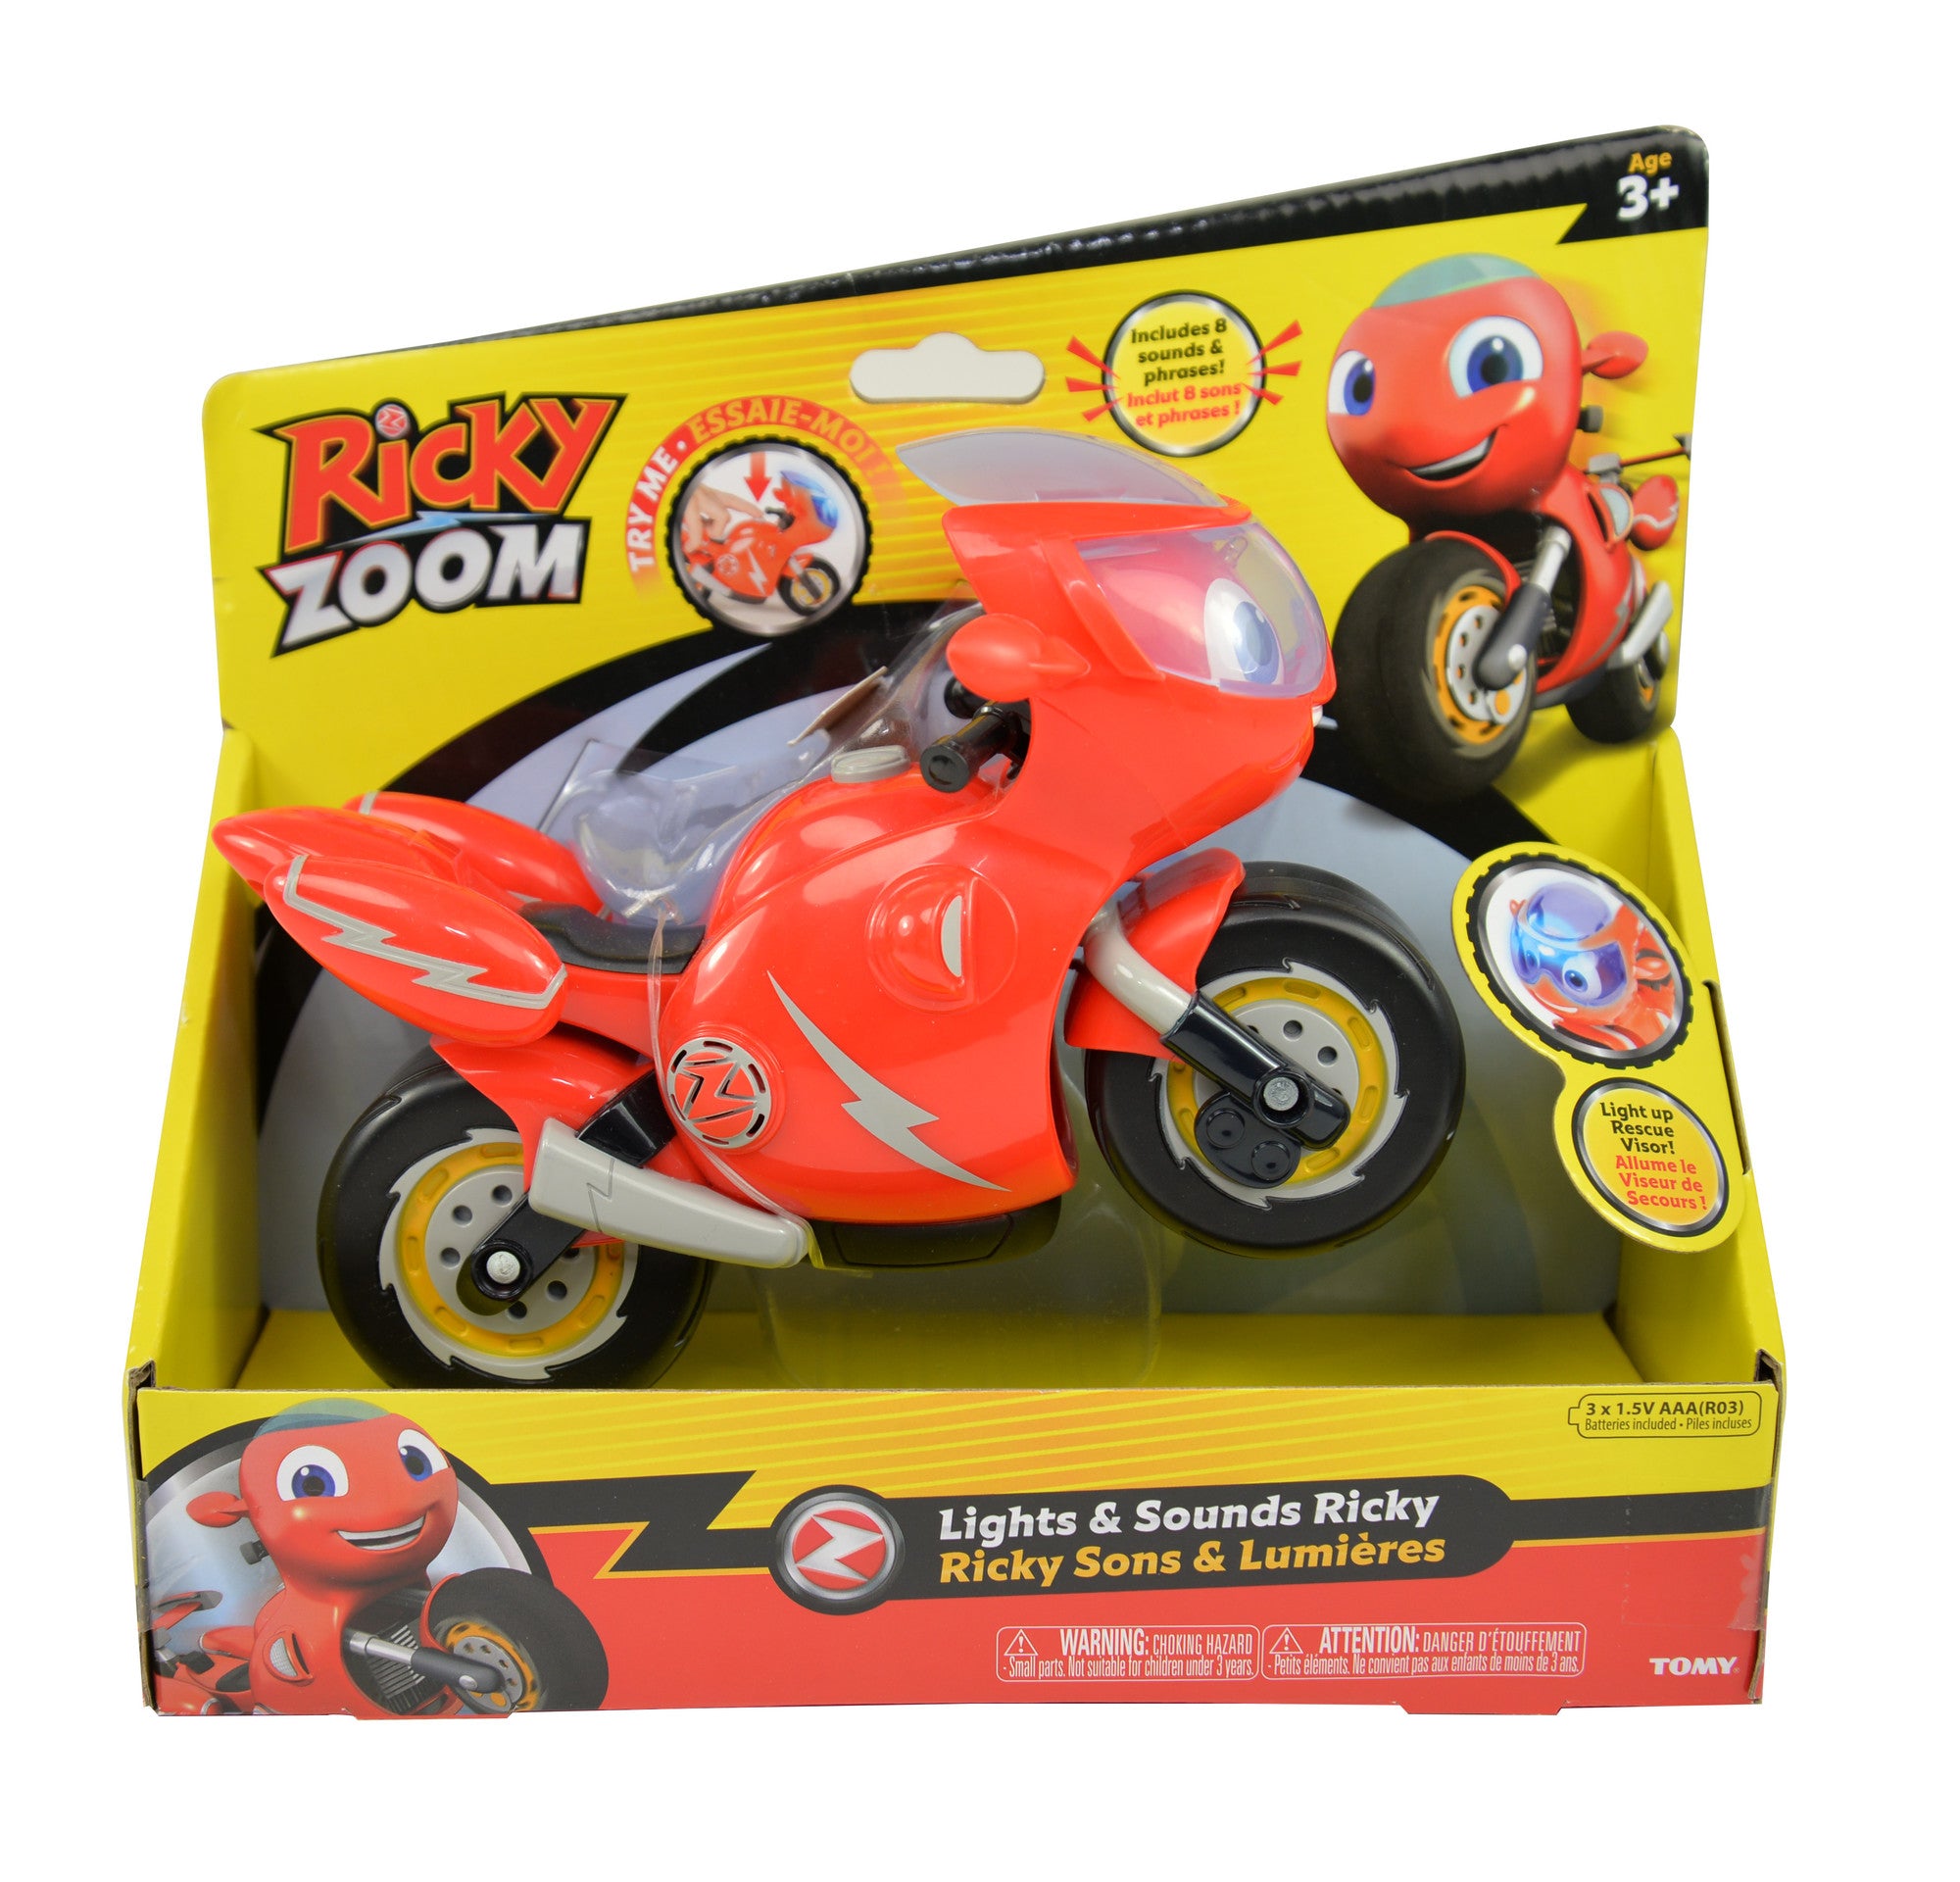 Ricky Zoom Lights & Sounds Ricky – Large 7 Inch Toy Motorcycle with 8  Sounds & Phrases